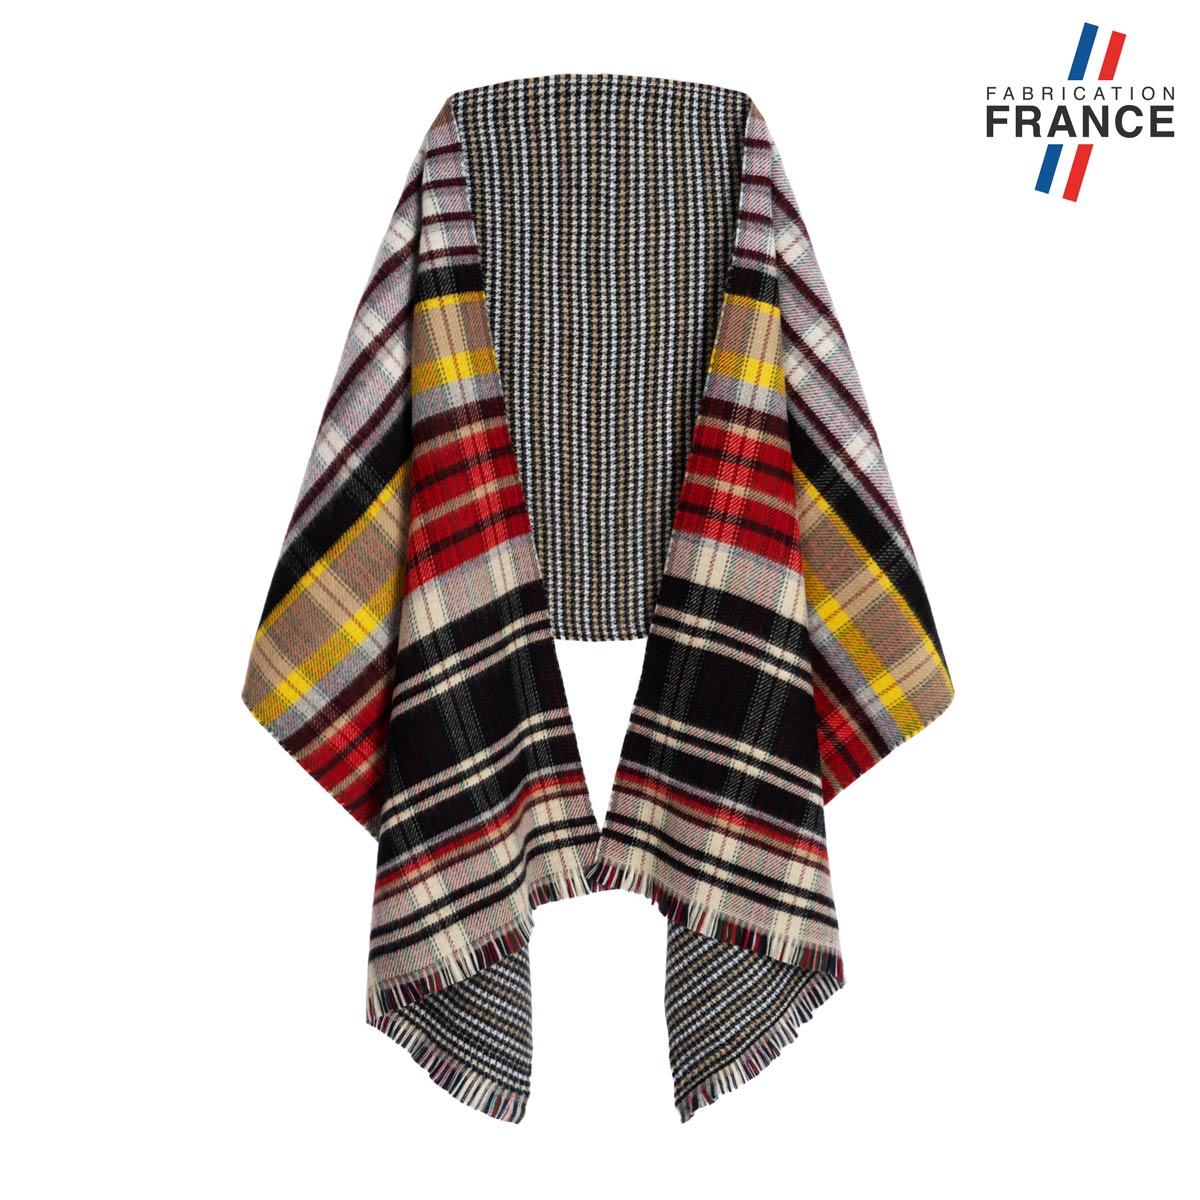 Chale-fantaisie-multicolore-made-in-france--AT-06748_F12-1FR